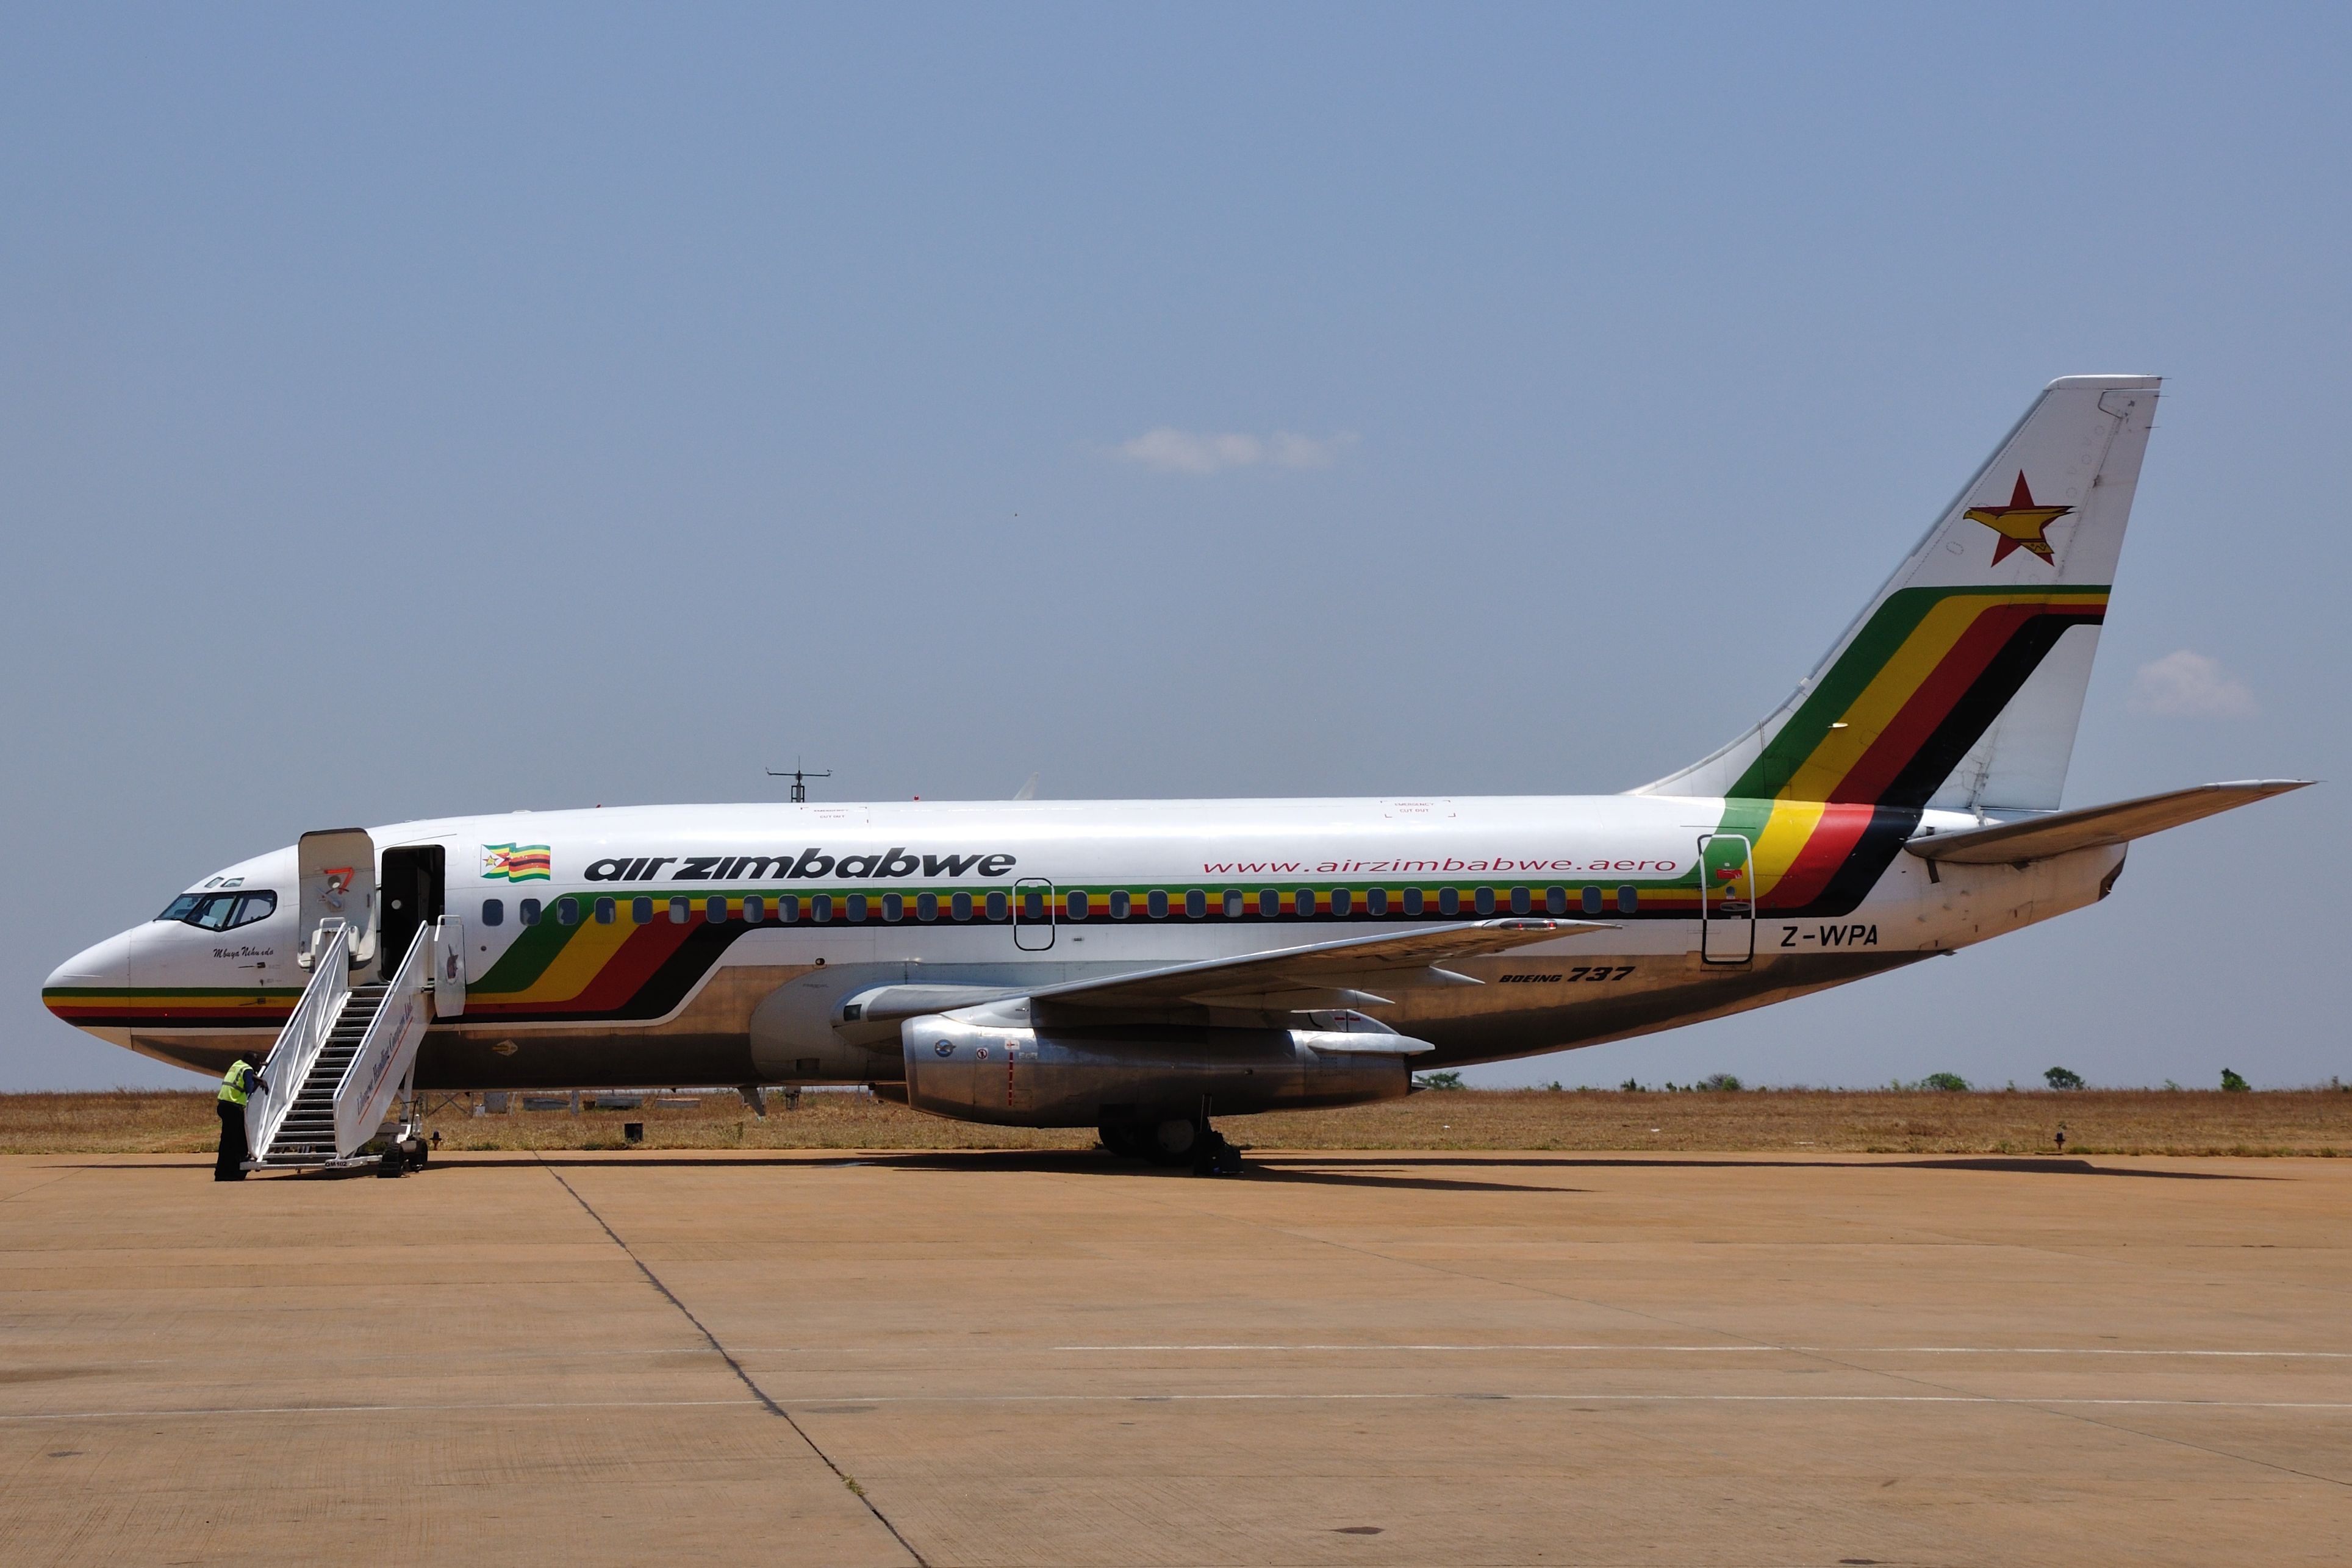 Air_Zimbabwe_Boeing_737-200 withnthe old livery